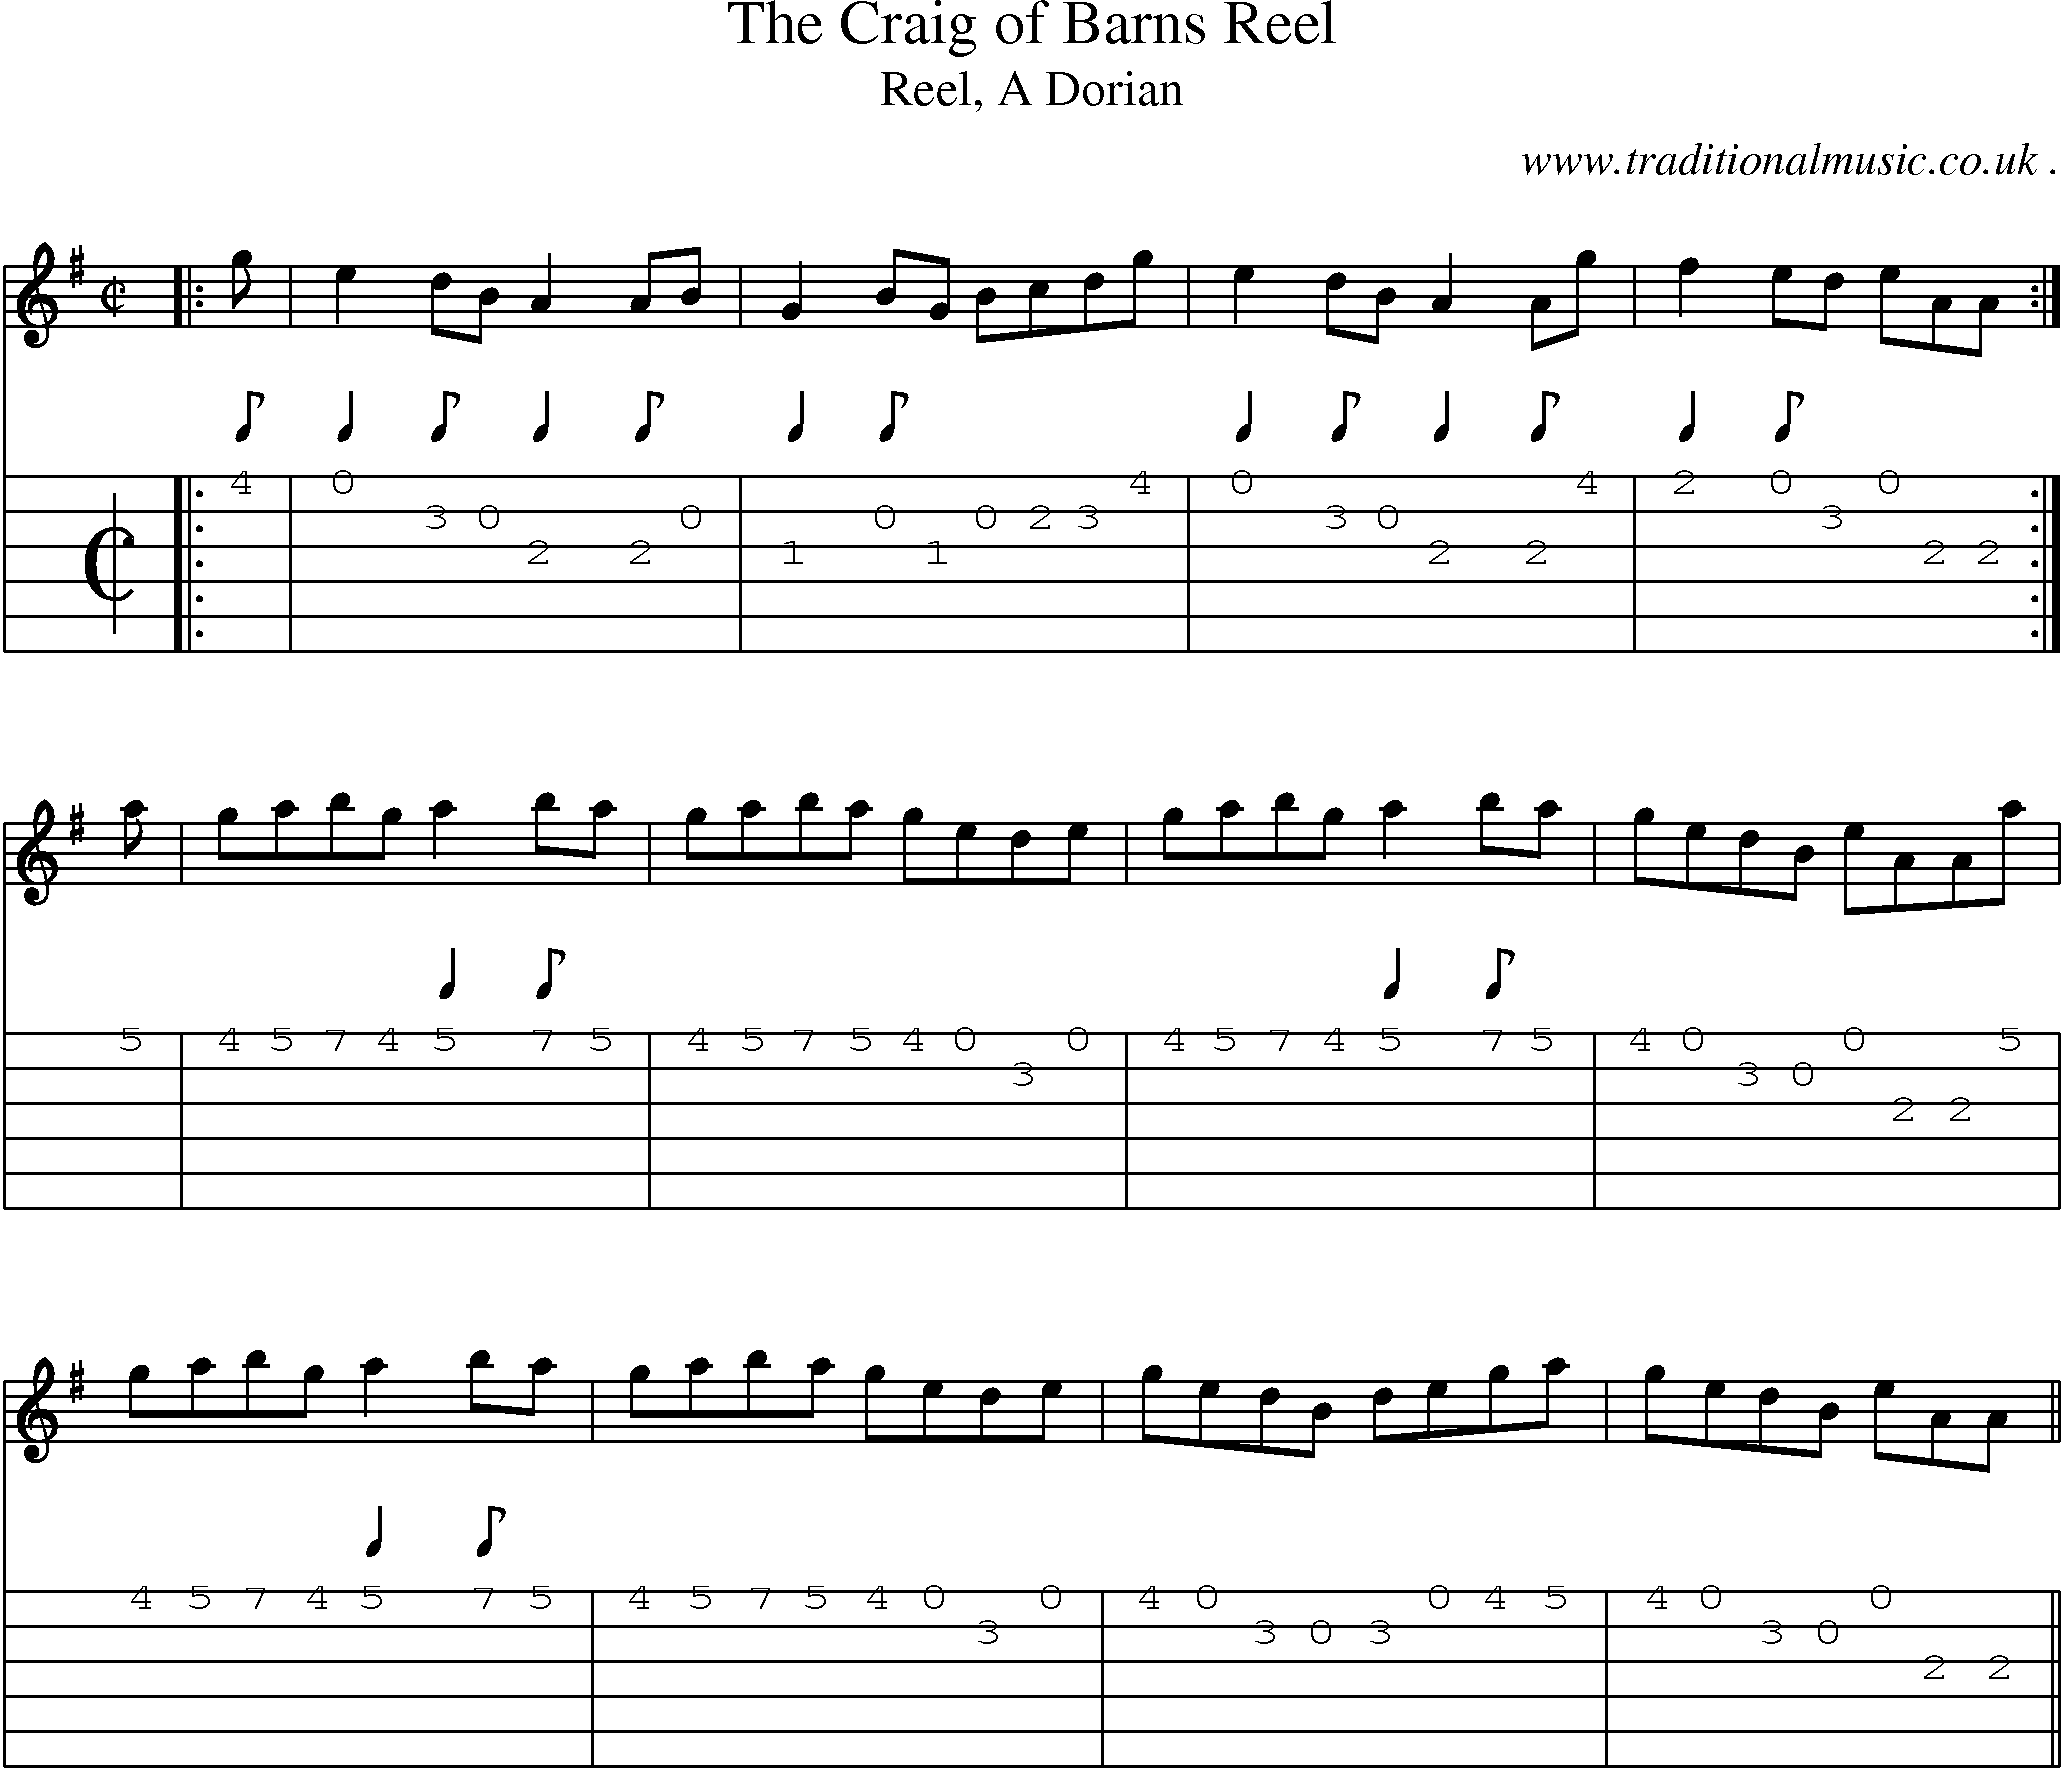 Sheet-music  score, Chords and Guitar Tabs for The Craig Of Barns Reel